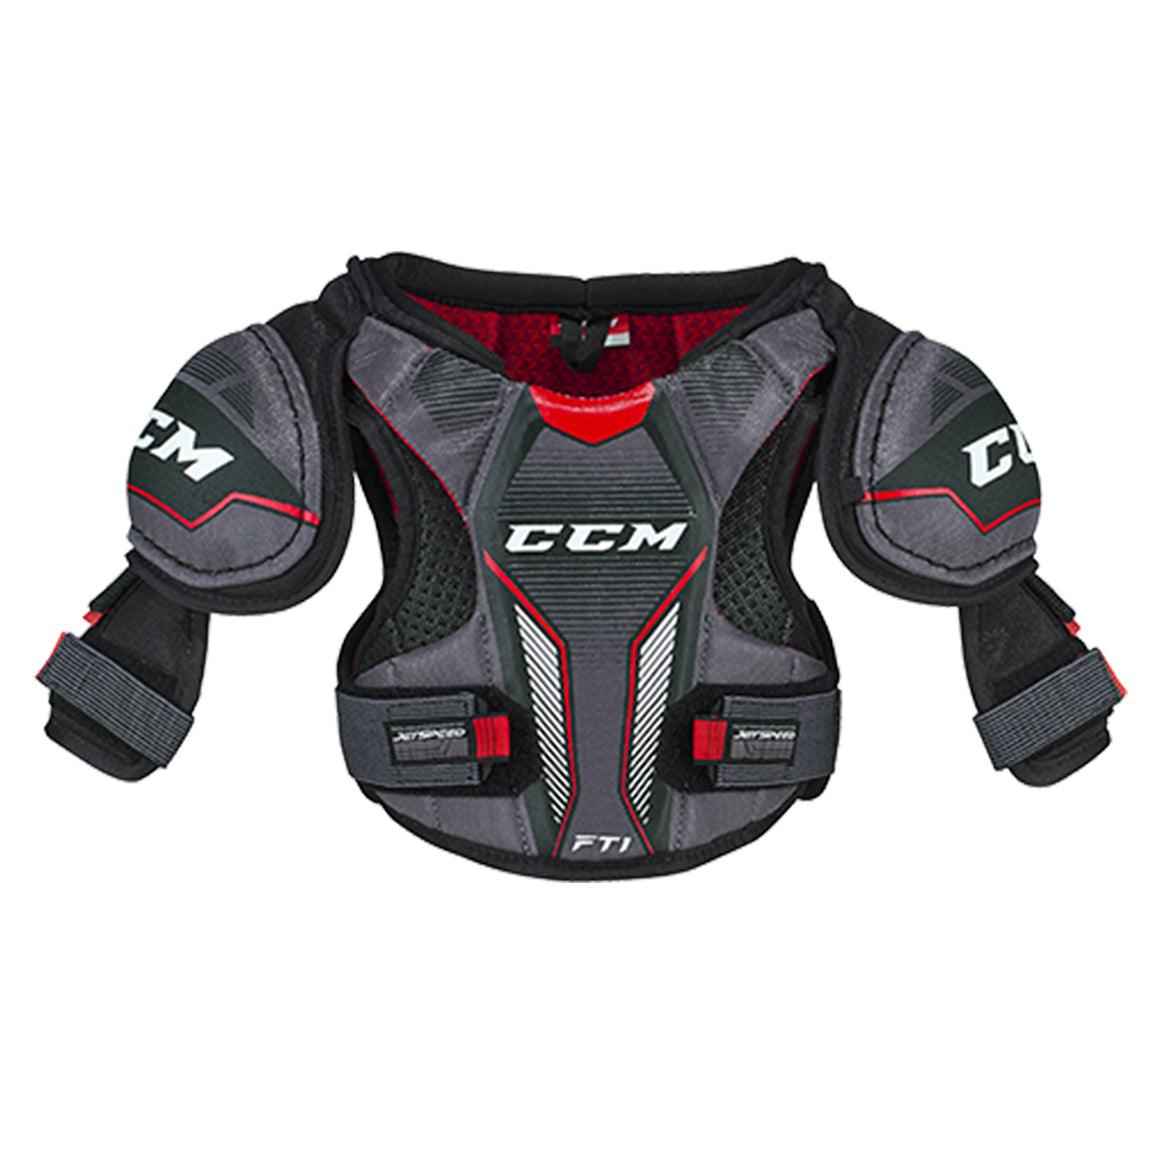 JetSpeed FT1 Shoulder Pads - Youth - Sports Excellence